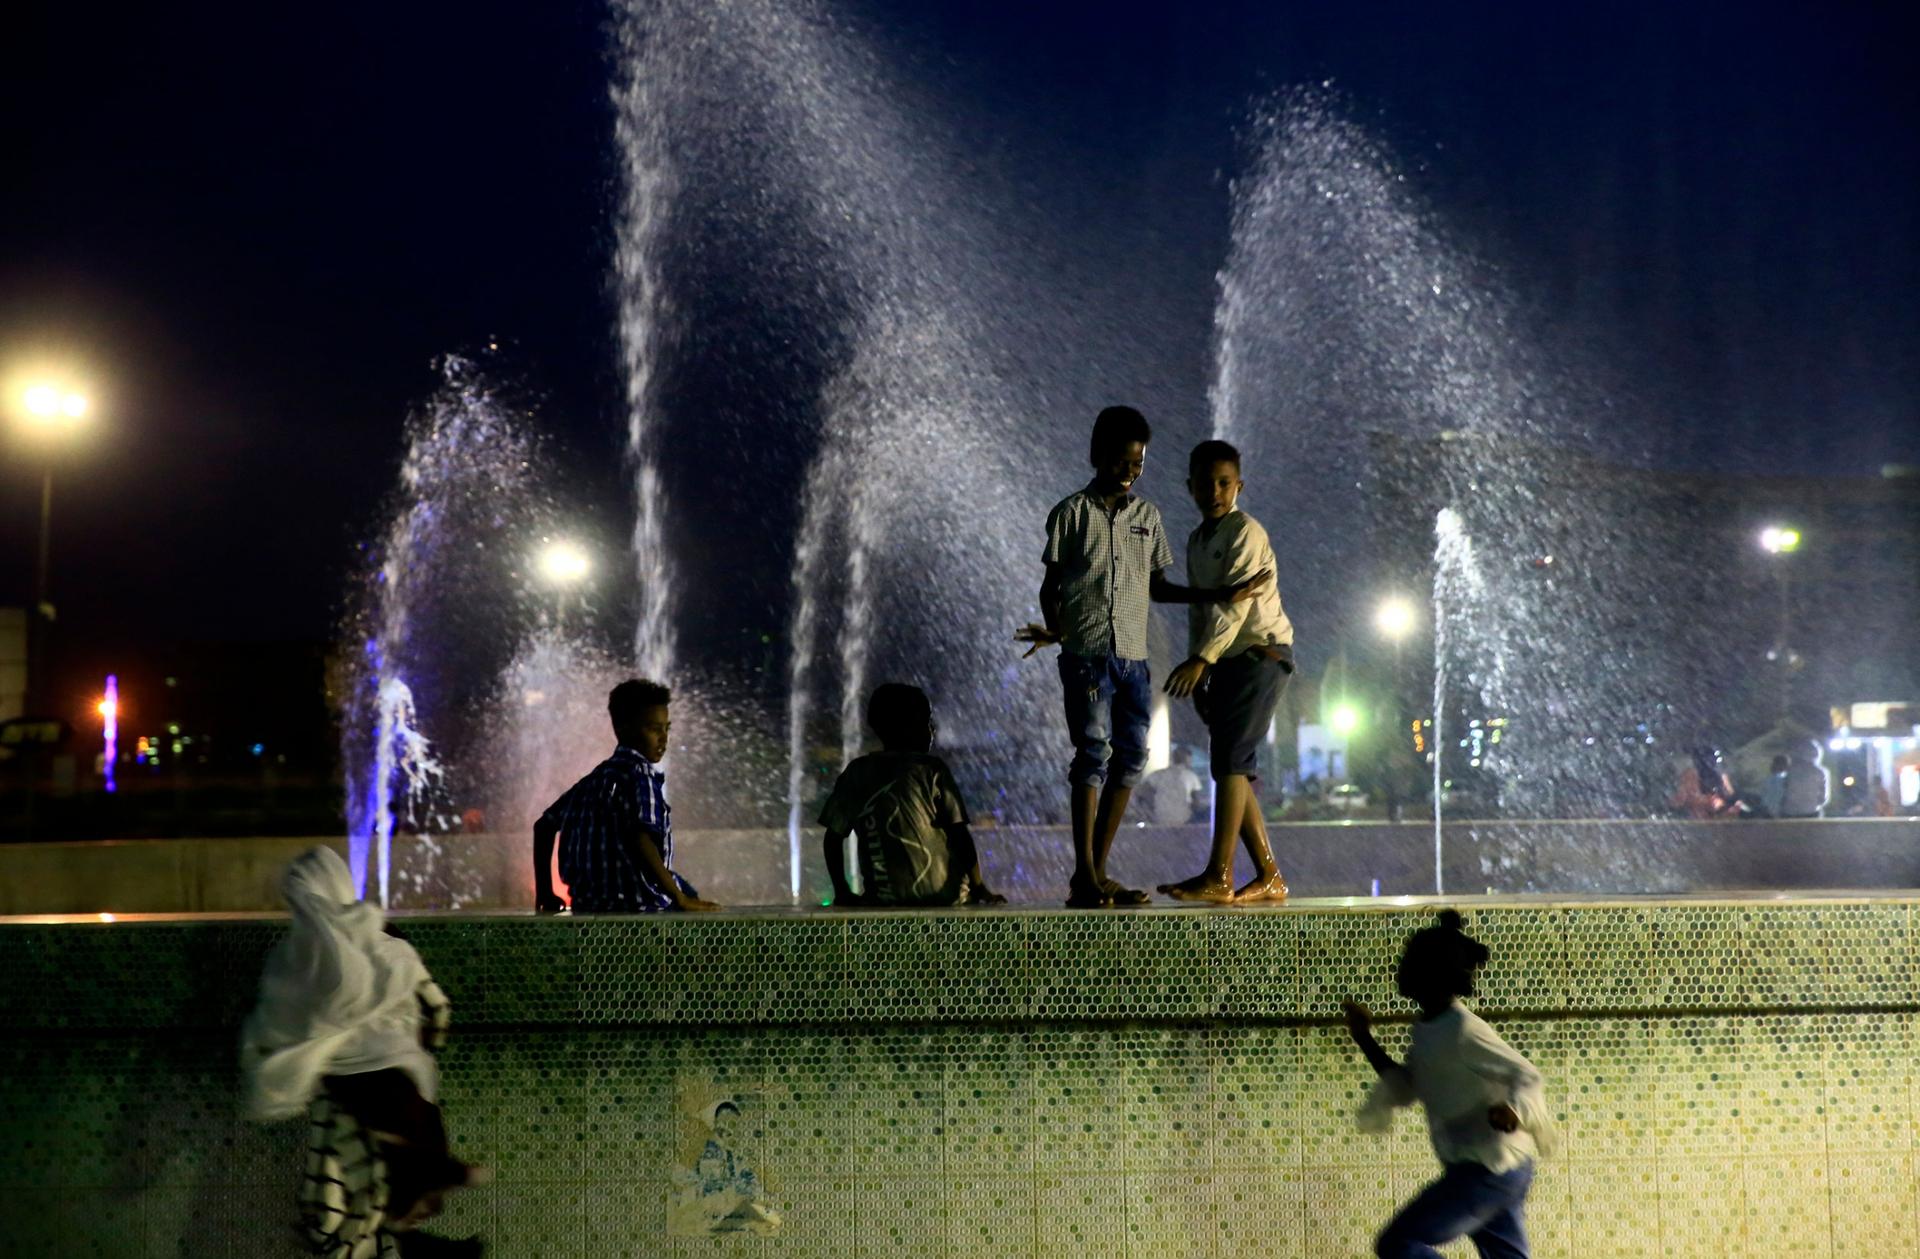 Several children are shown standing on the tiled edge of a fountain with water spraying up in the background.